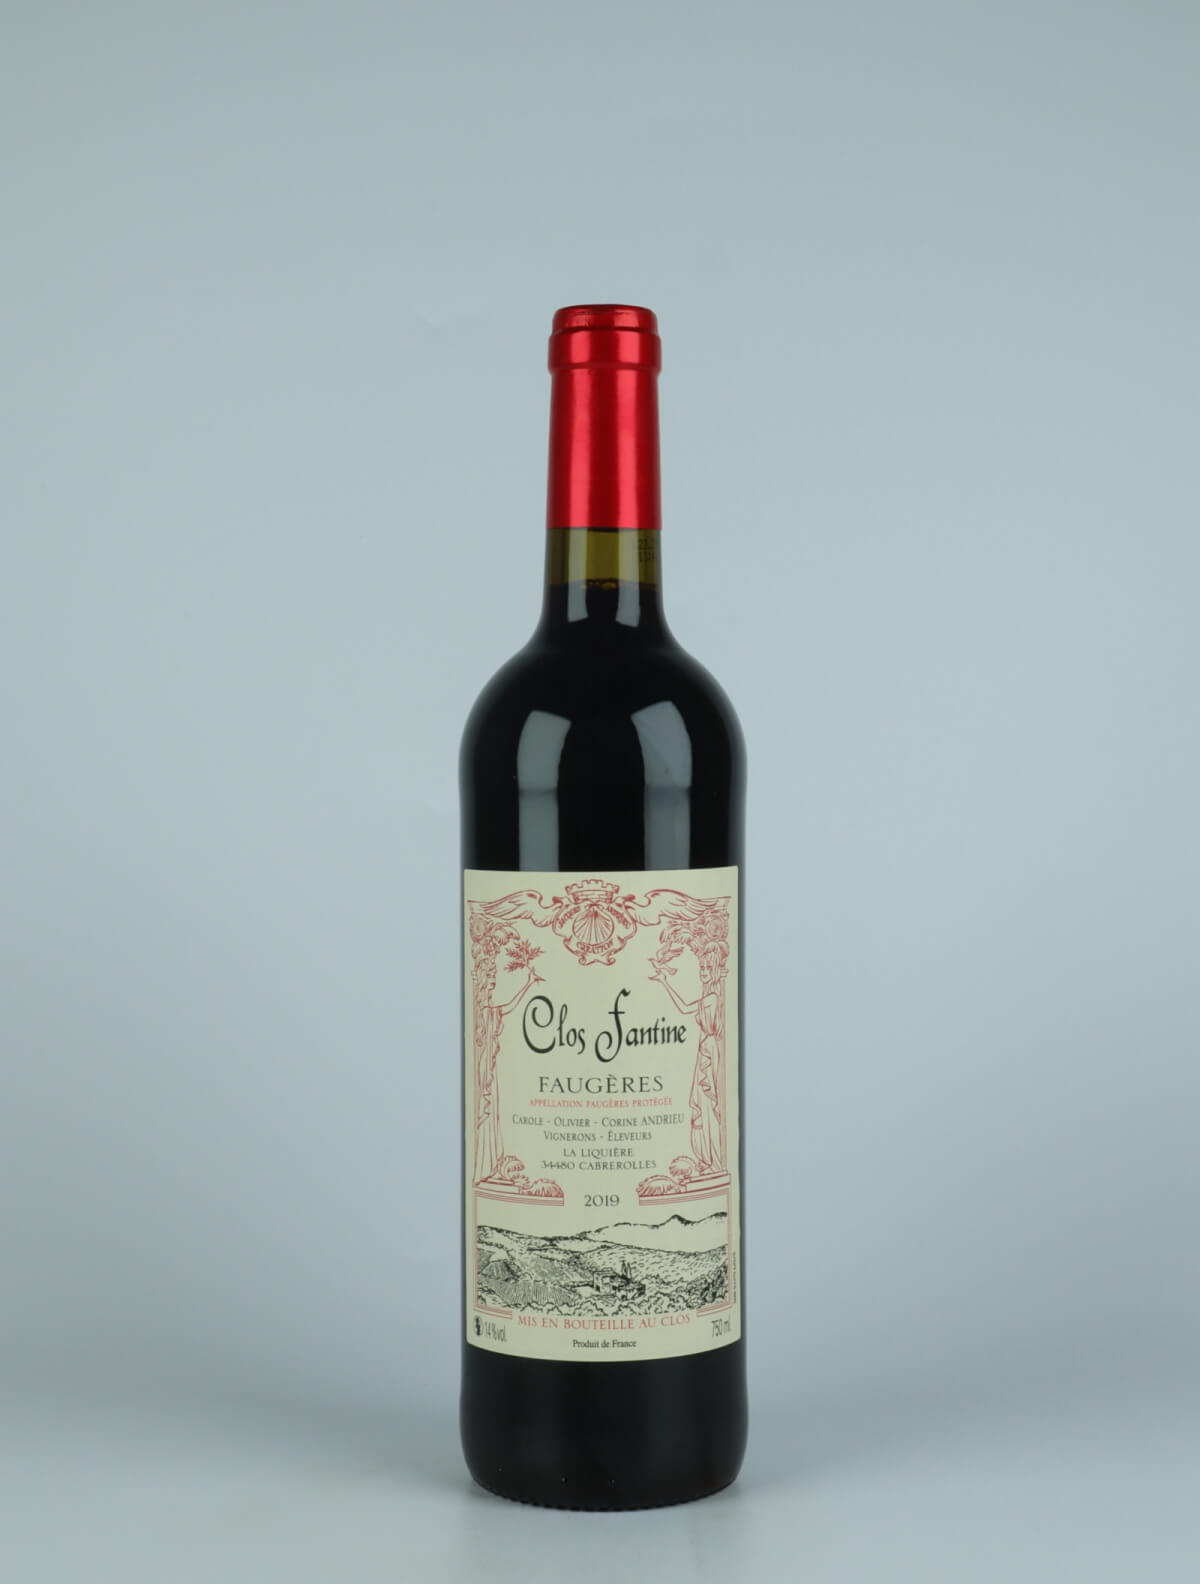 A bottle 2019 Faugères - Tradition Red wine from Clos Fantine, Languedoc in France